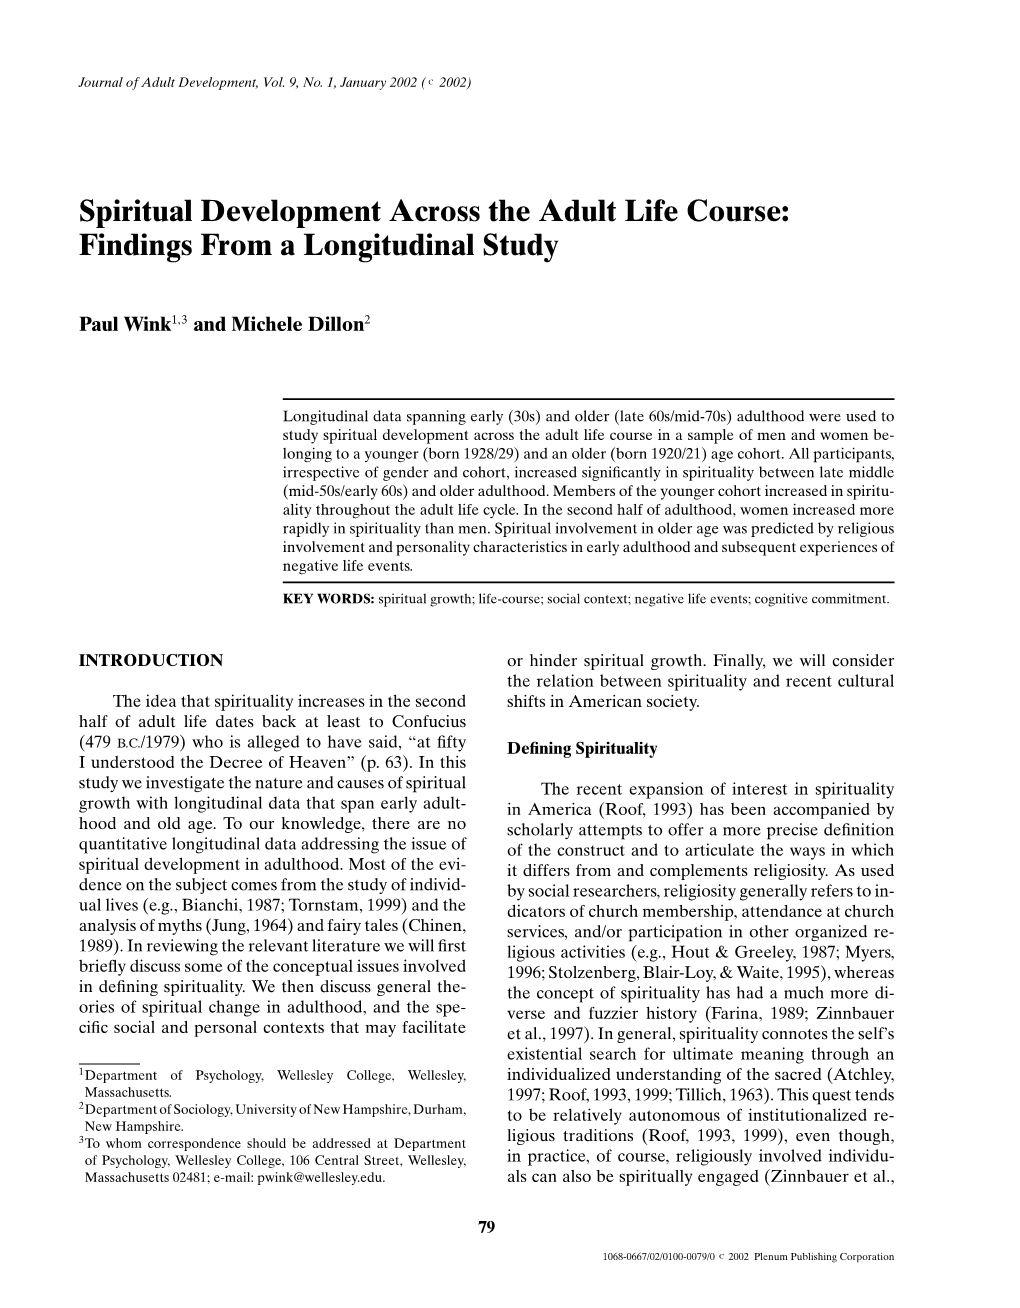 Spiritual Development Across the Adult Life Course: Findings from a Longitudinal Study